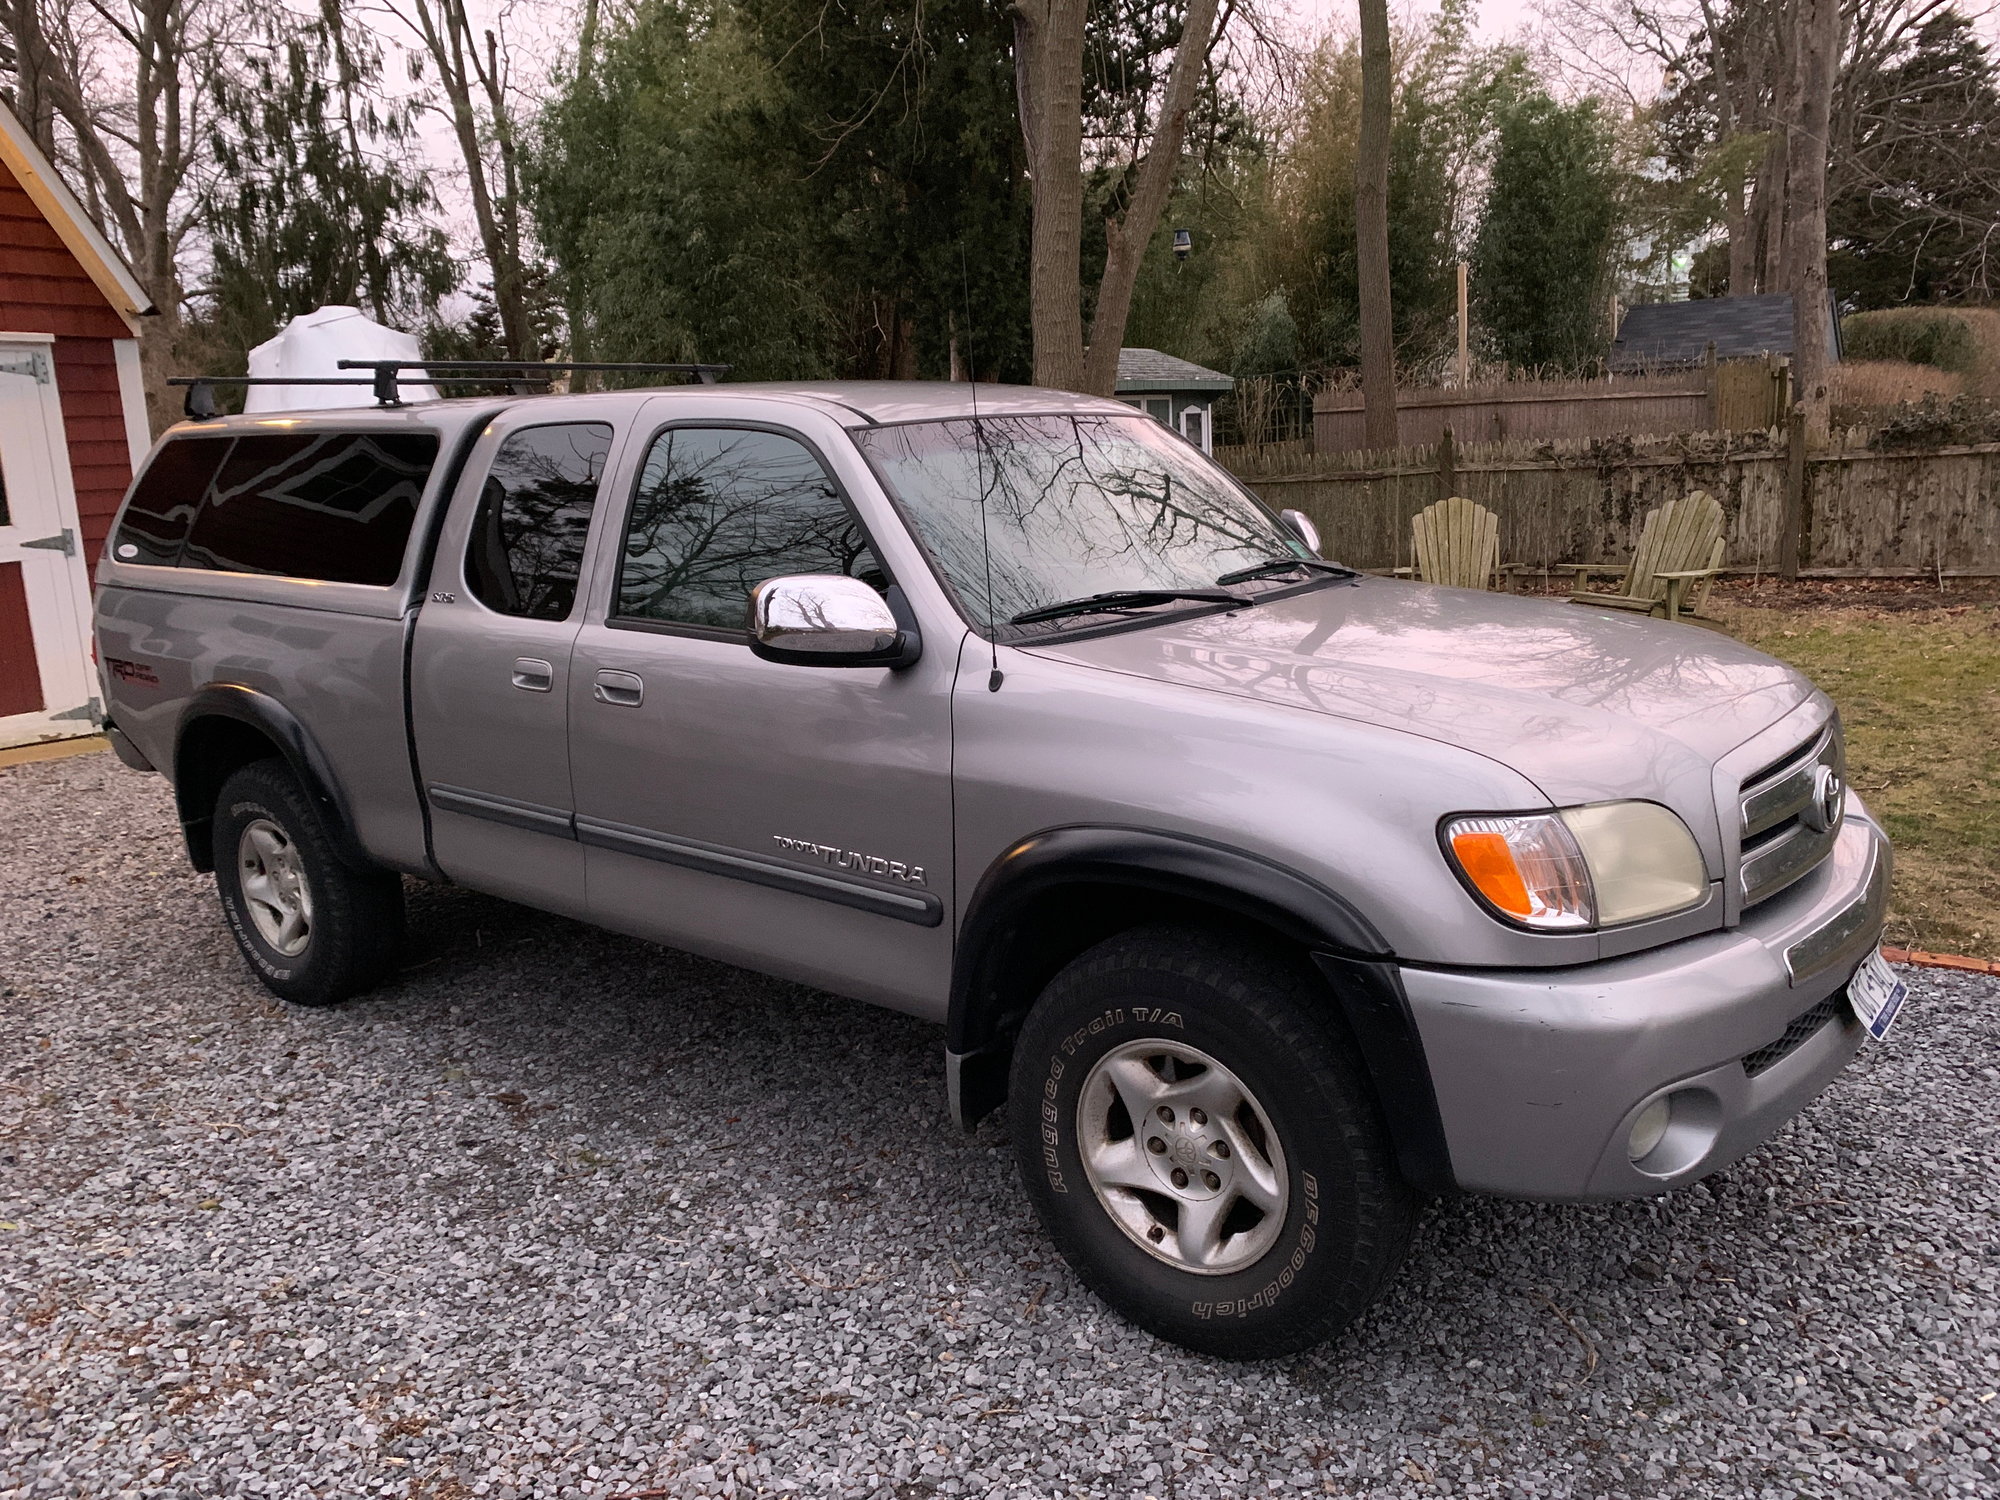 2003 toyota tundra sr5 trd 4x4 package - The Hull Truth - Boating and  Fishing Forum